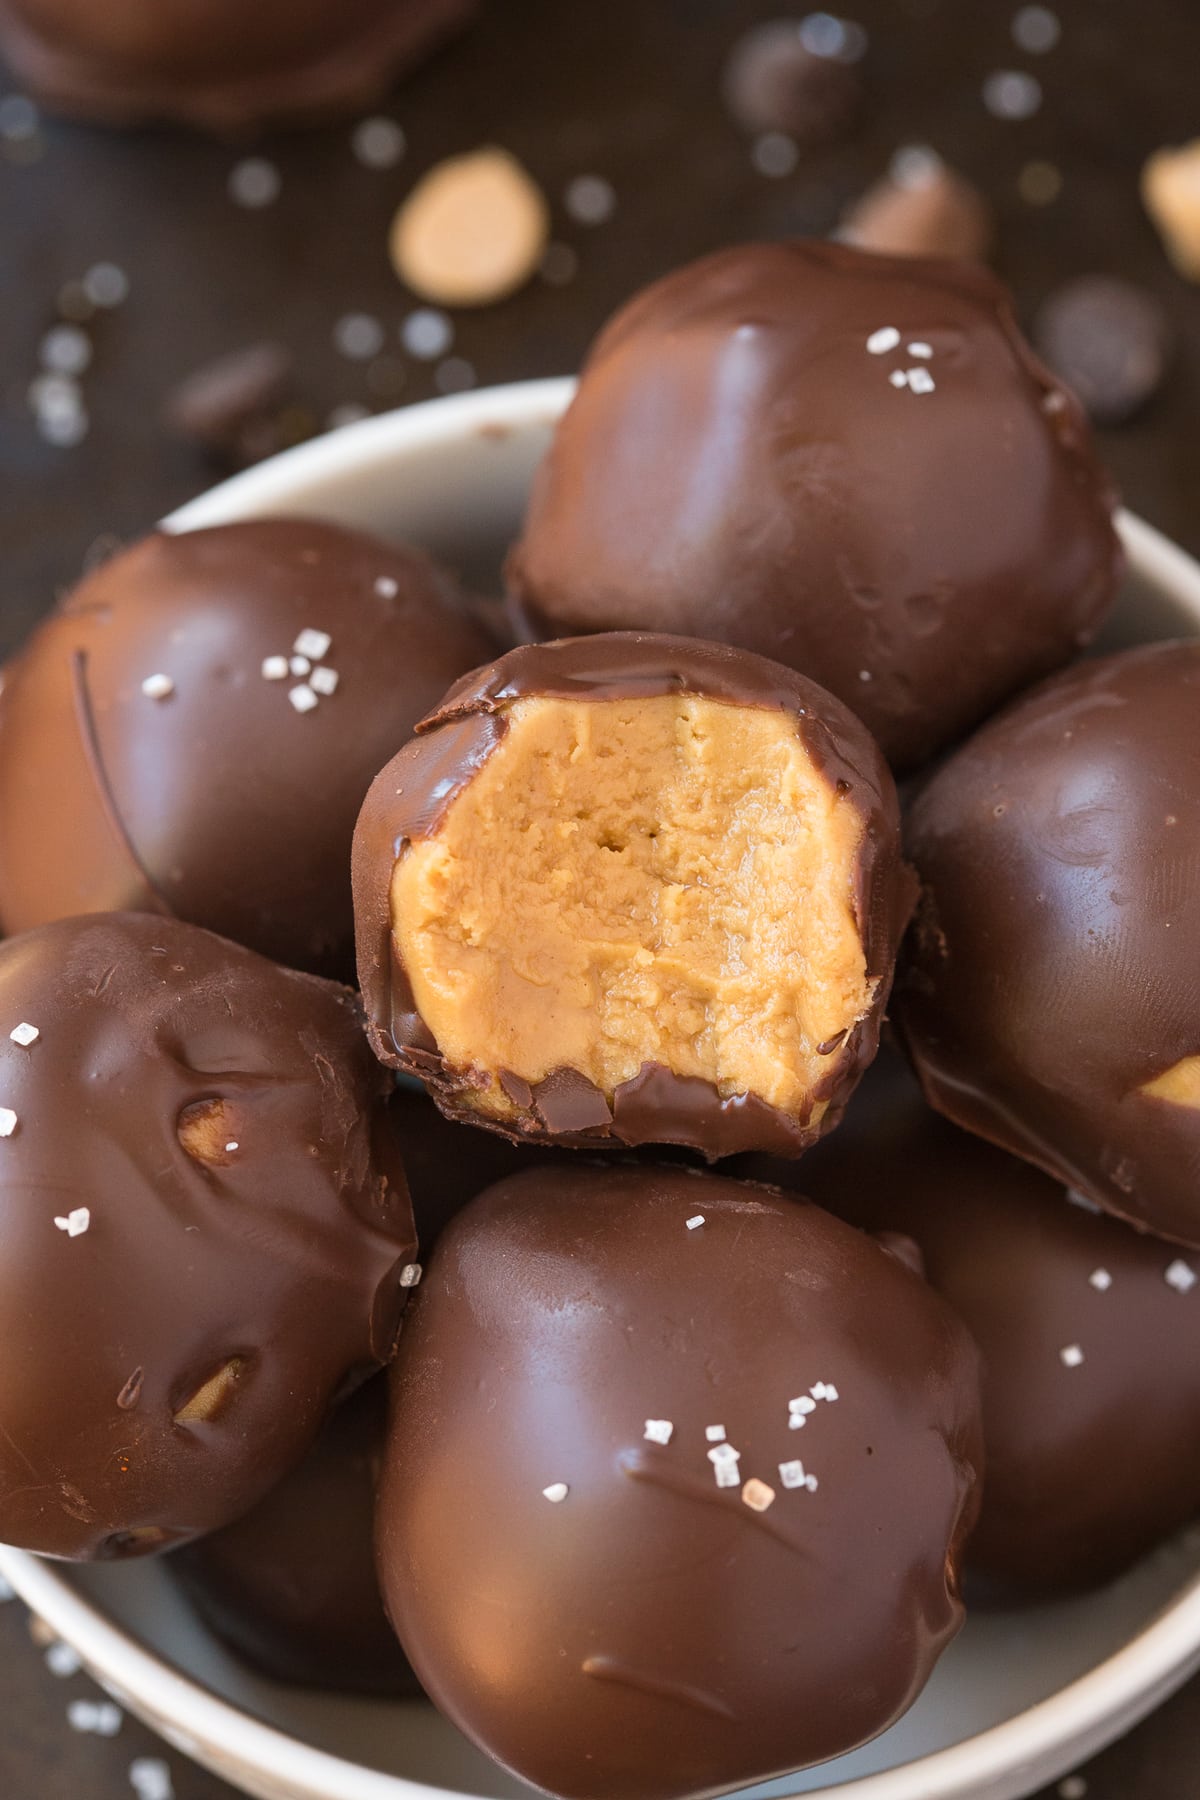 4-Ingredient No Bake Keto Chocolate Peanut Butter Balls (Paleo, Vegan, Low Carb)- An easy healthy no bake chocolate peanut butter protein balls recipe ready in 5 minutes and needing 4 ingredients! A quick and easy snack! #peanutbutter #chocolatepeanutbutter #proteinballs #ketorecipe | Recipe on thebigmansworld.com